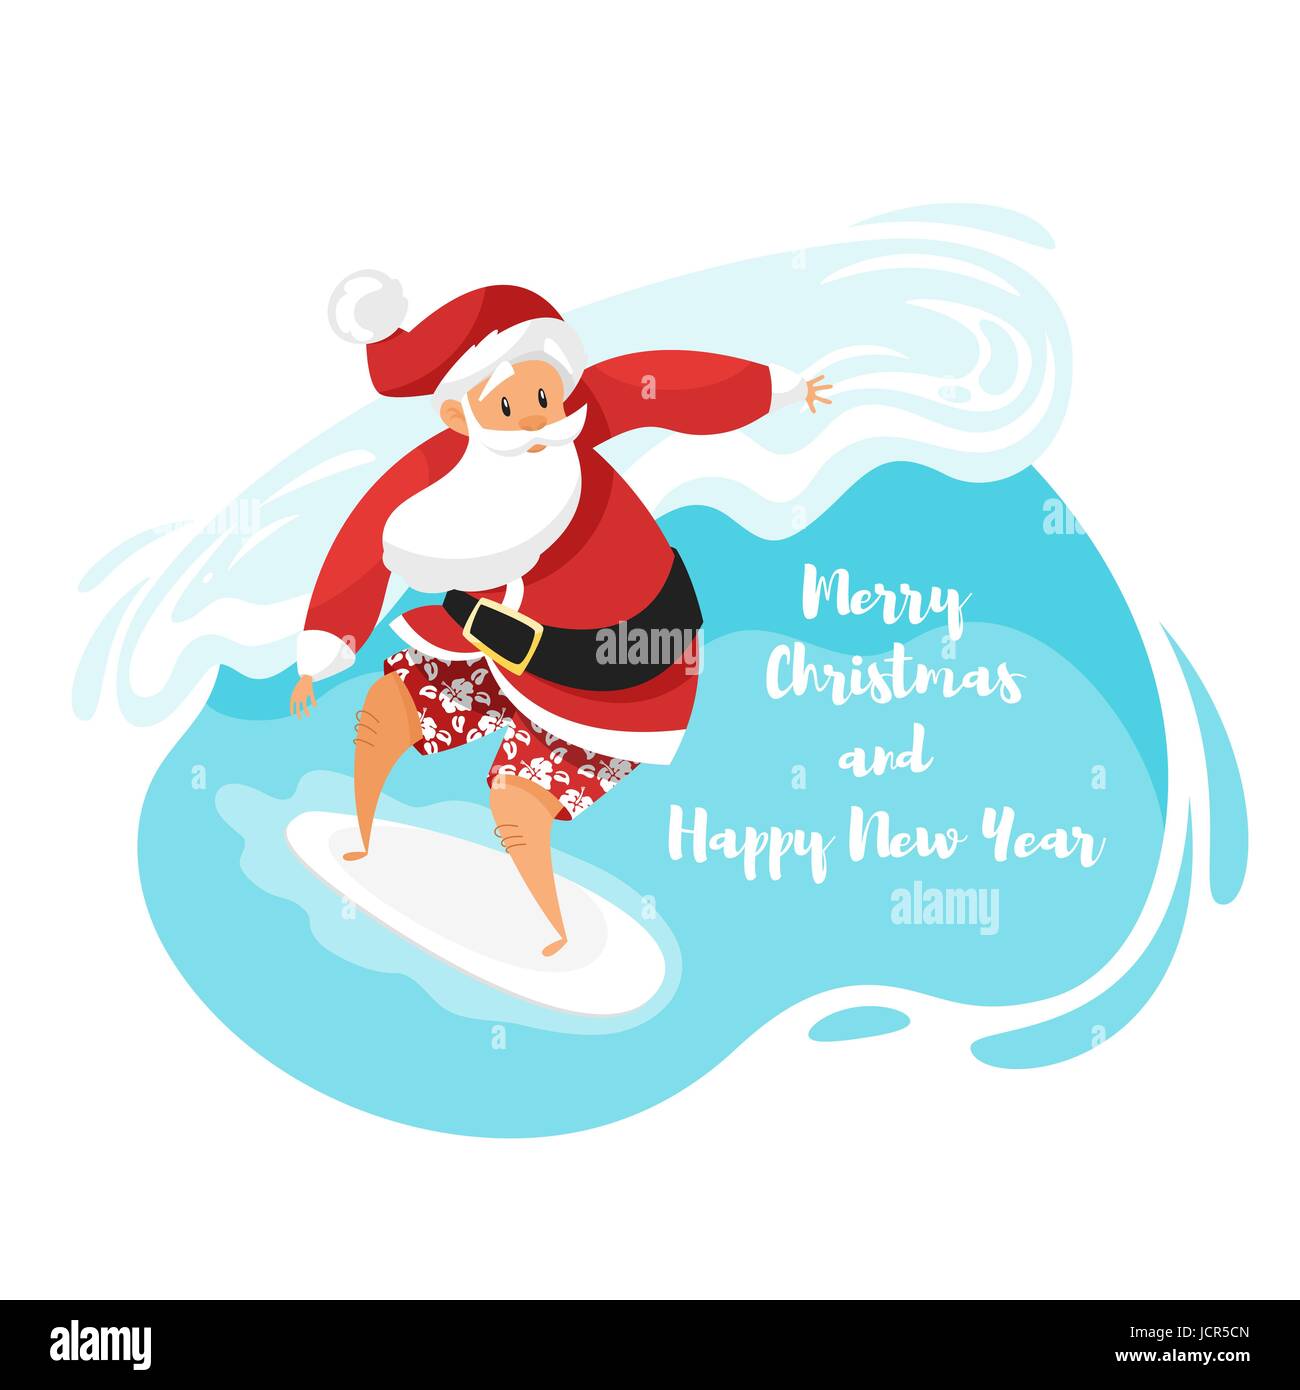 Vector cartoon style illustration of Santa surfer riding the wave. Holiday Christmas and New Year greeting card template. Stock Vector